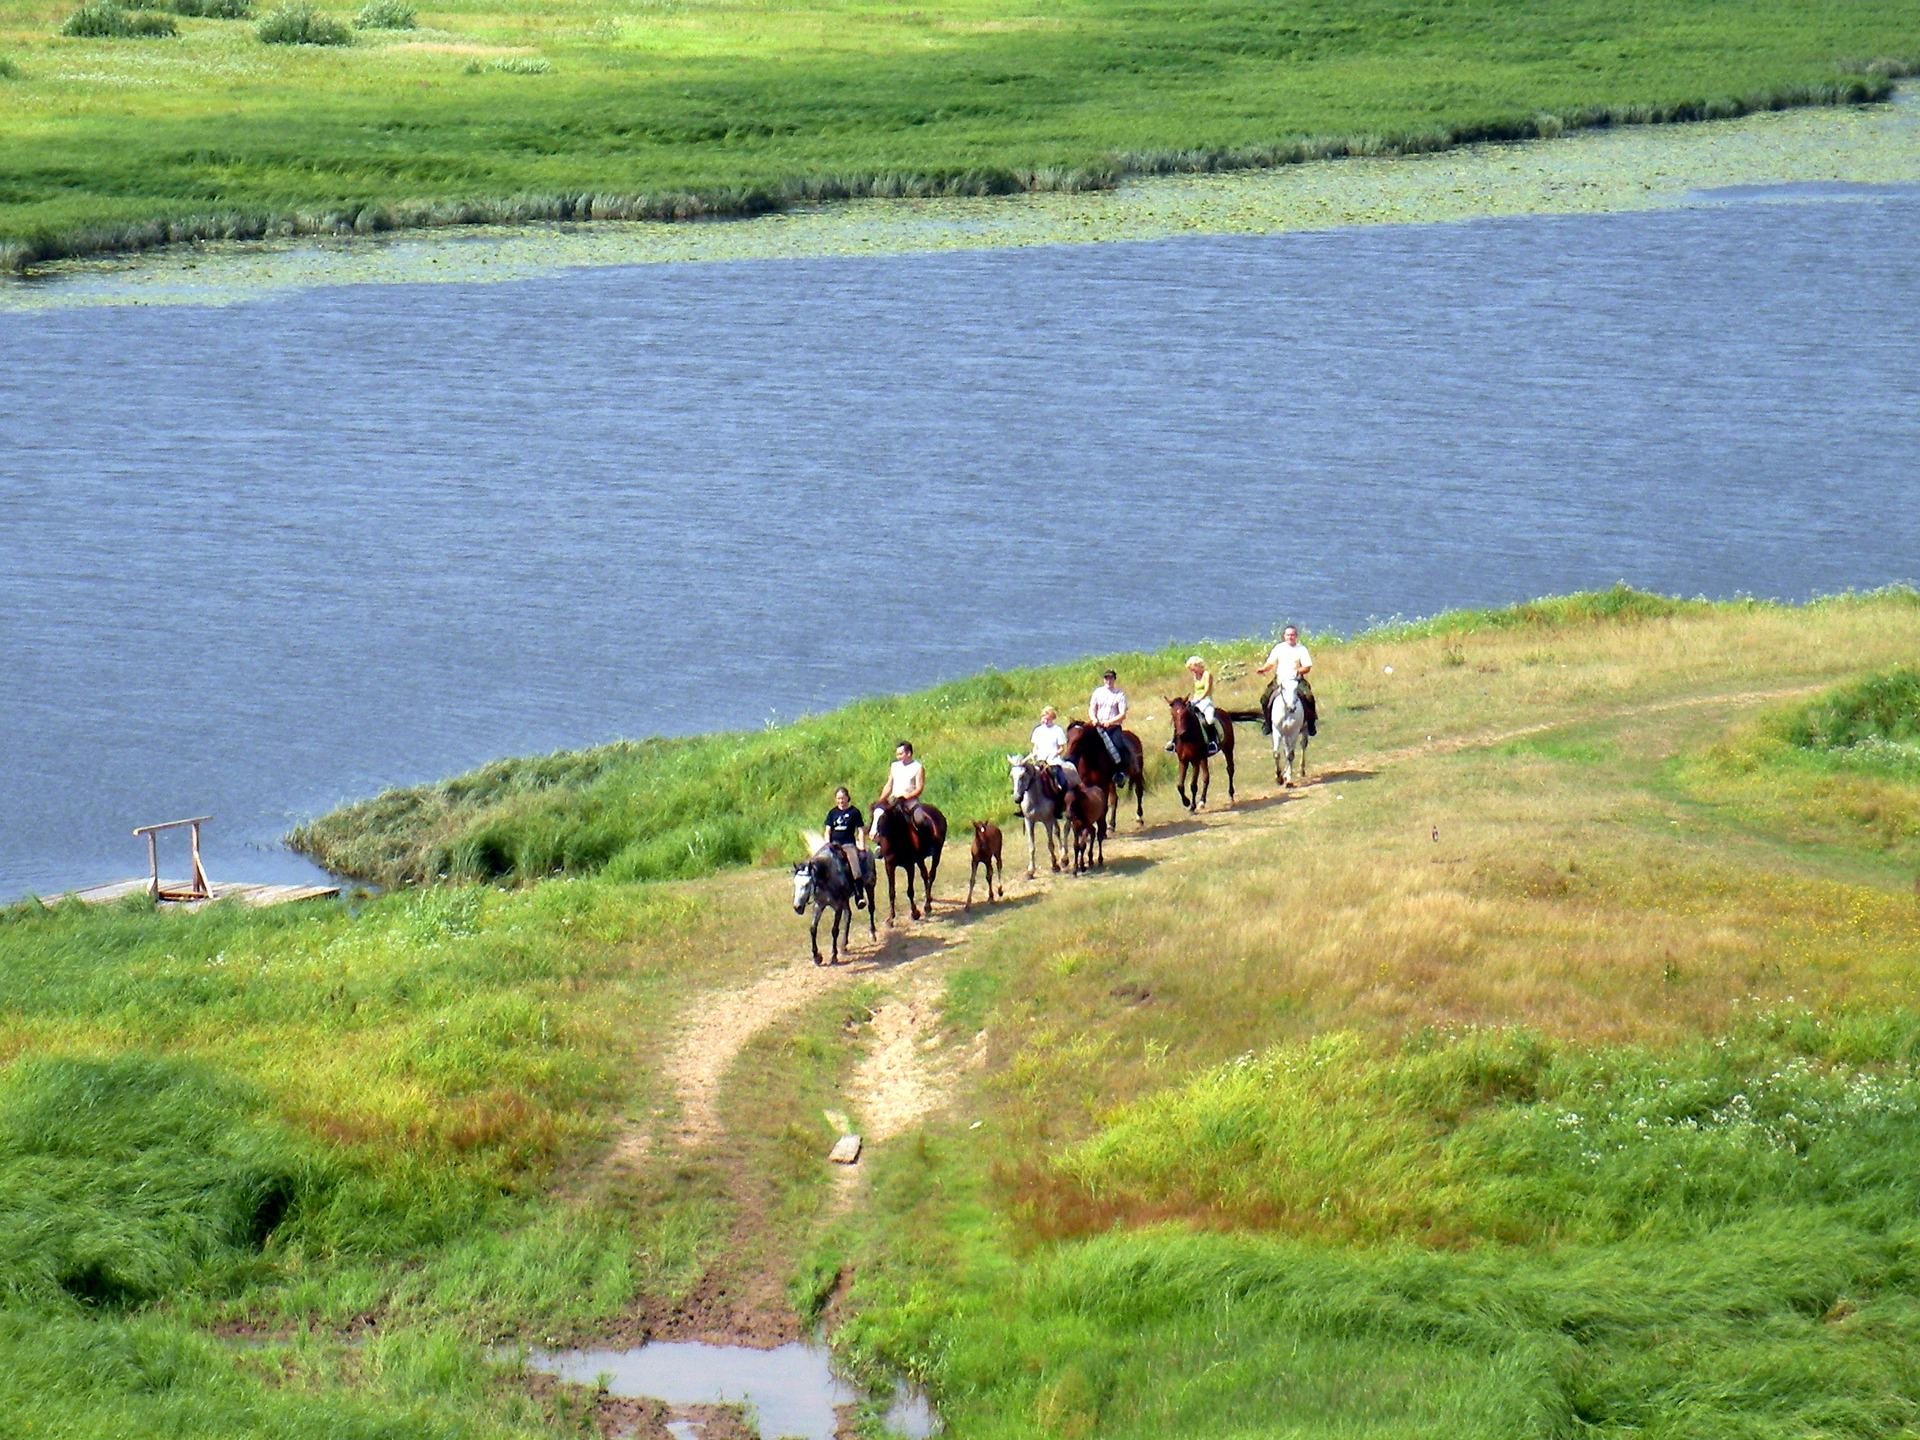 People walking along the shore of the lake on horses